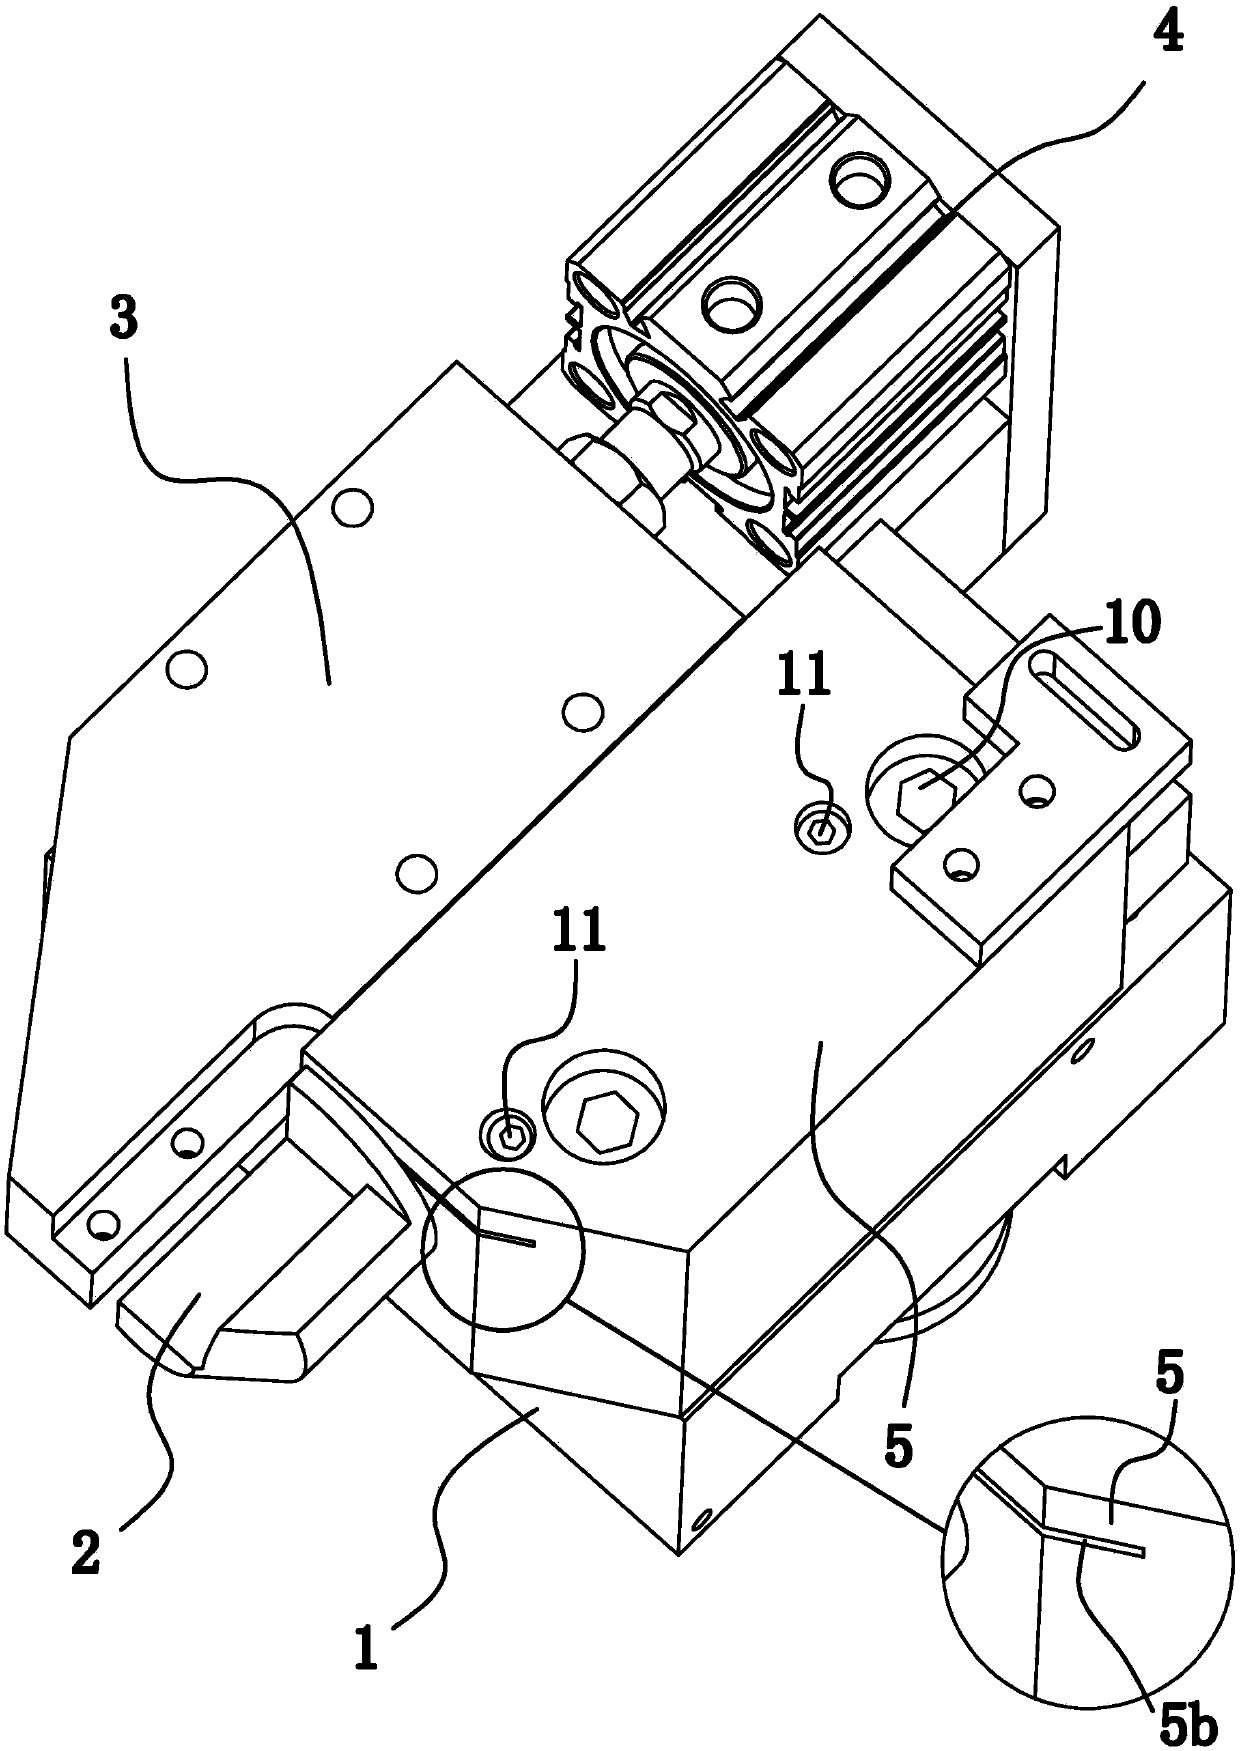 Tool rest structure for machine tools